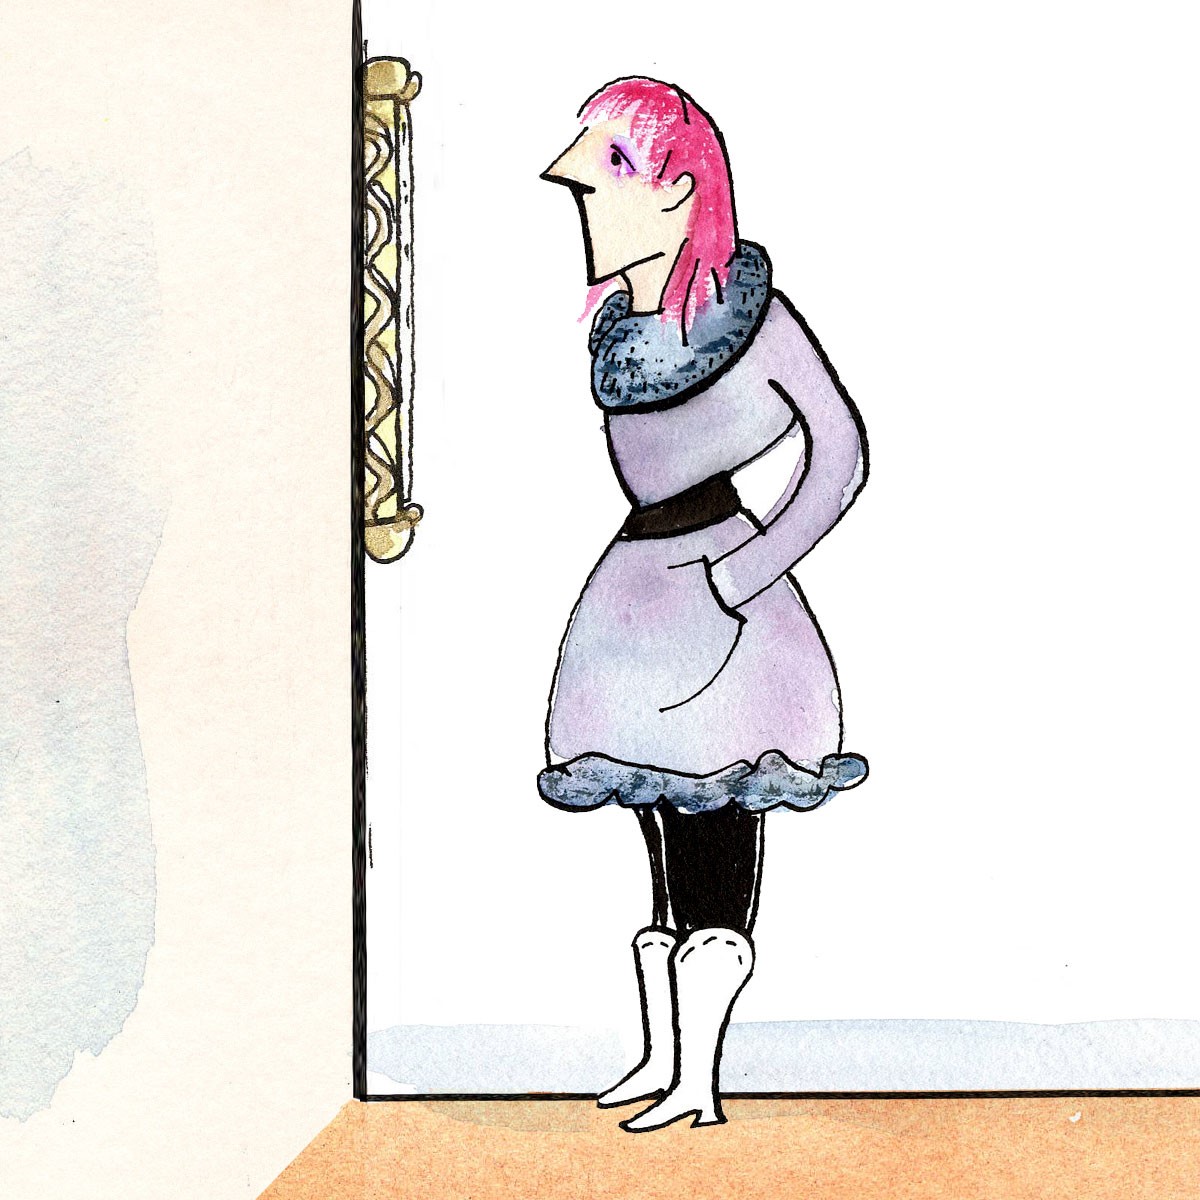 Illustration of a woman with pink hair looking at a framed artwork on the wall